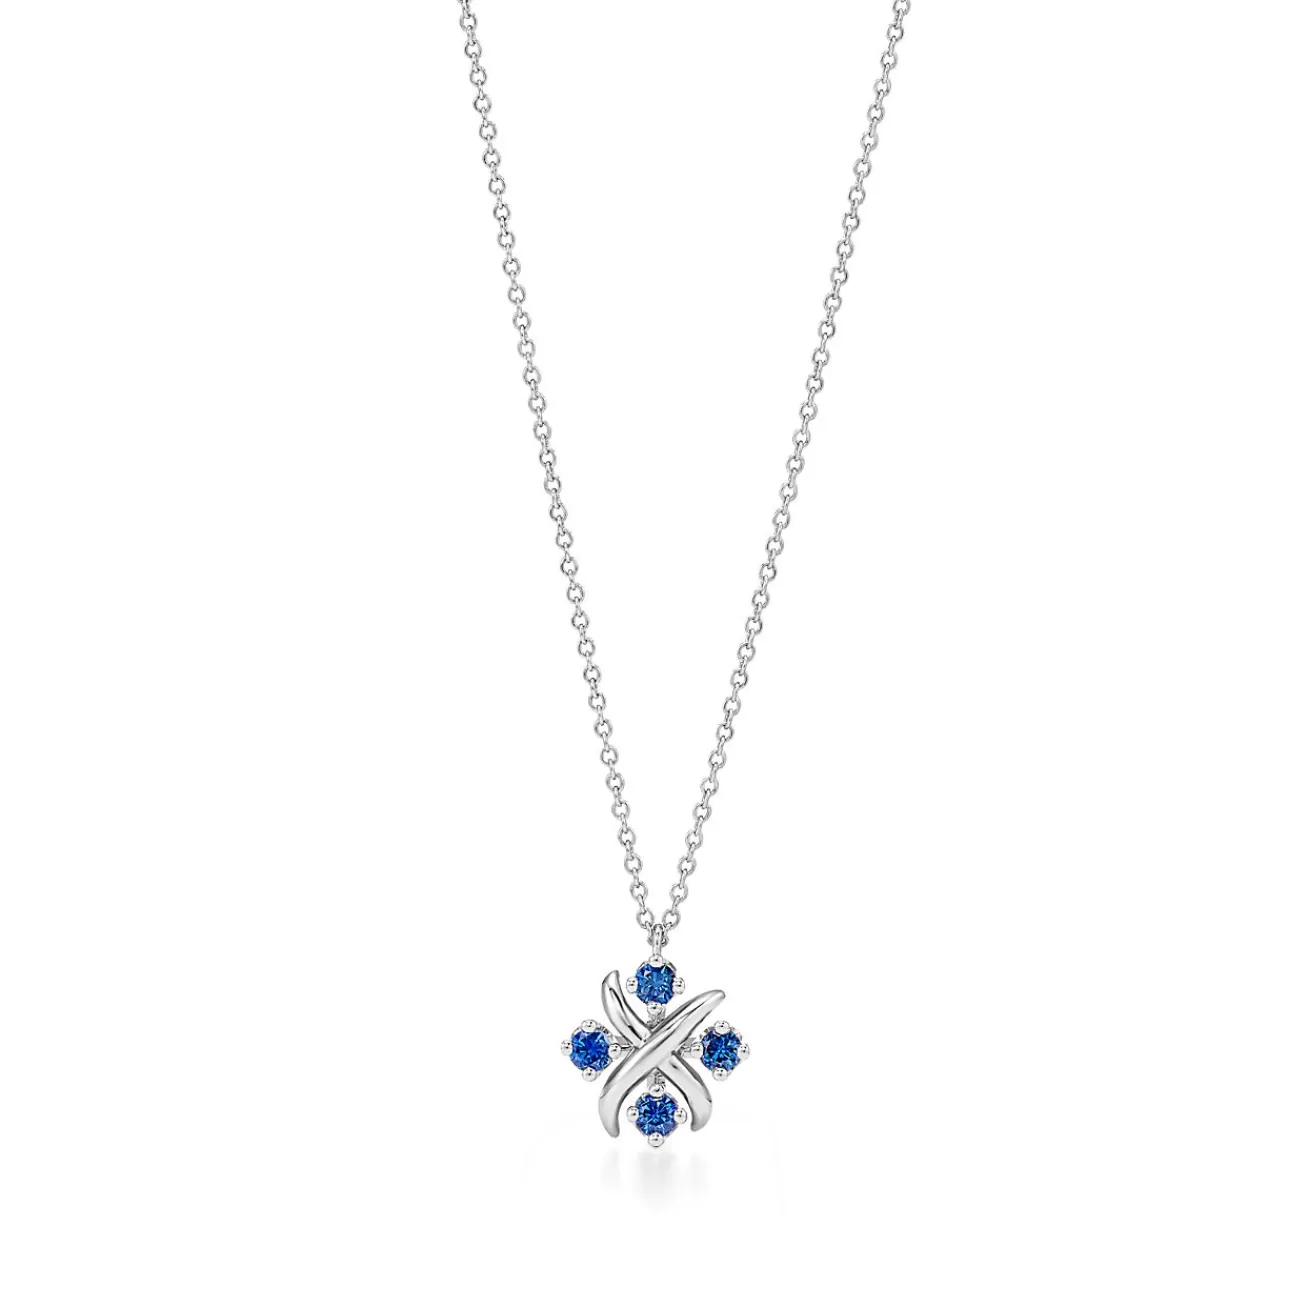 Tiffany & Co. Schlumberger® Lynn pendant in platinum with sapphires. | ^ Necklaces & Pendants | Gifts for Her